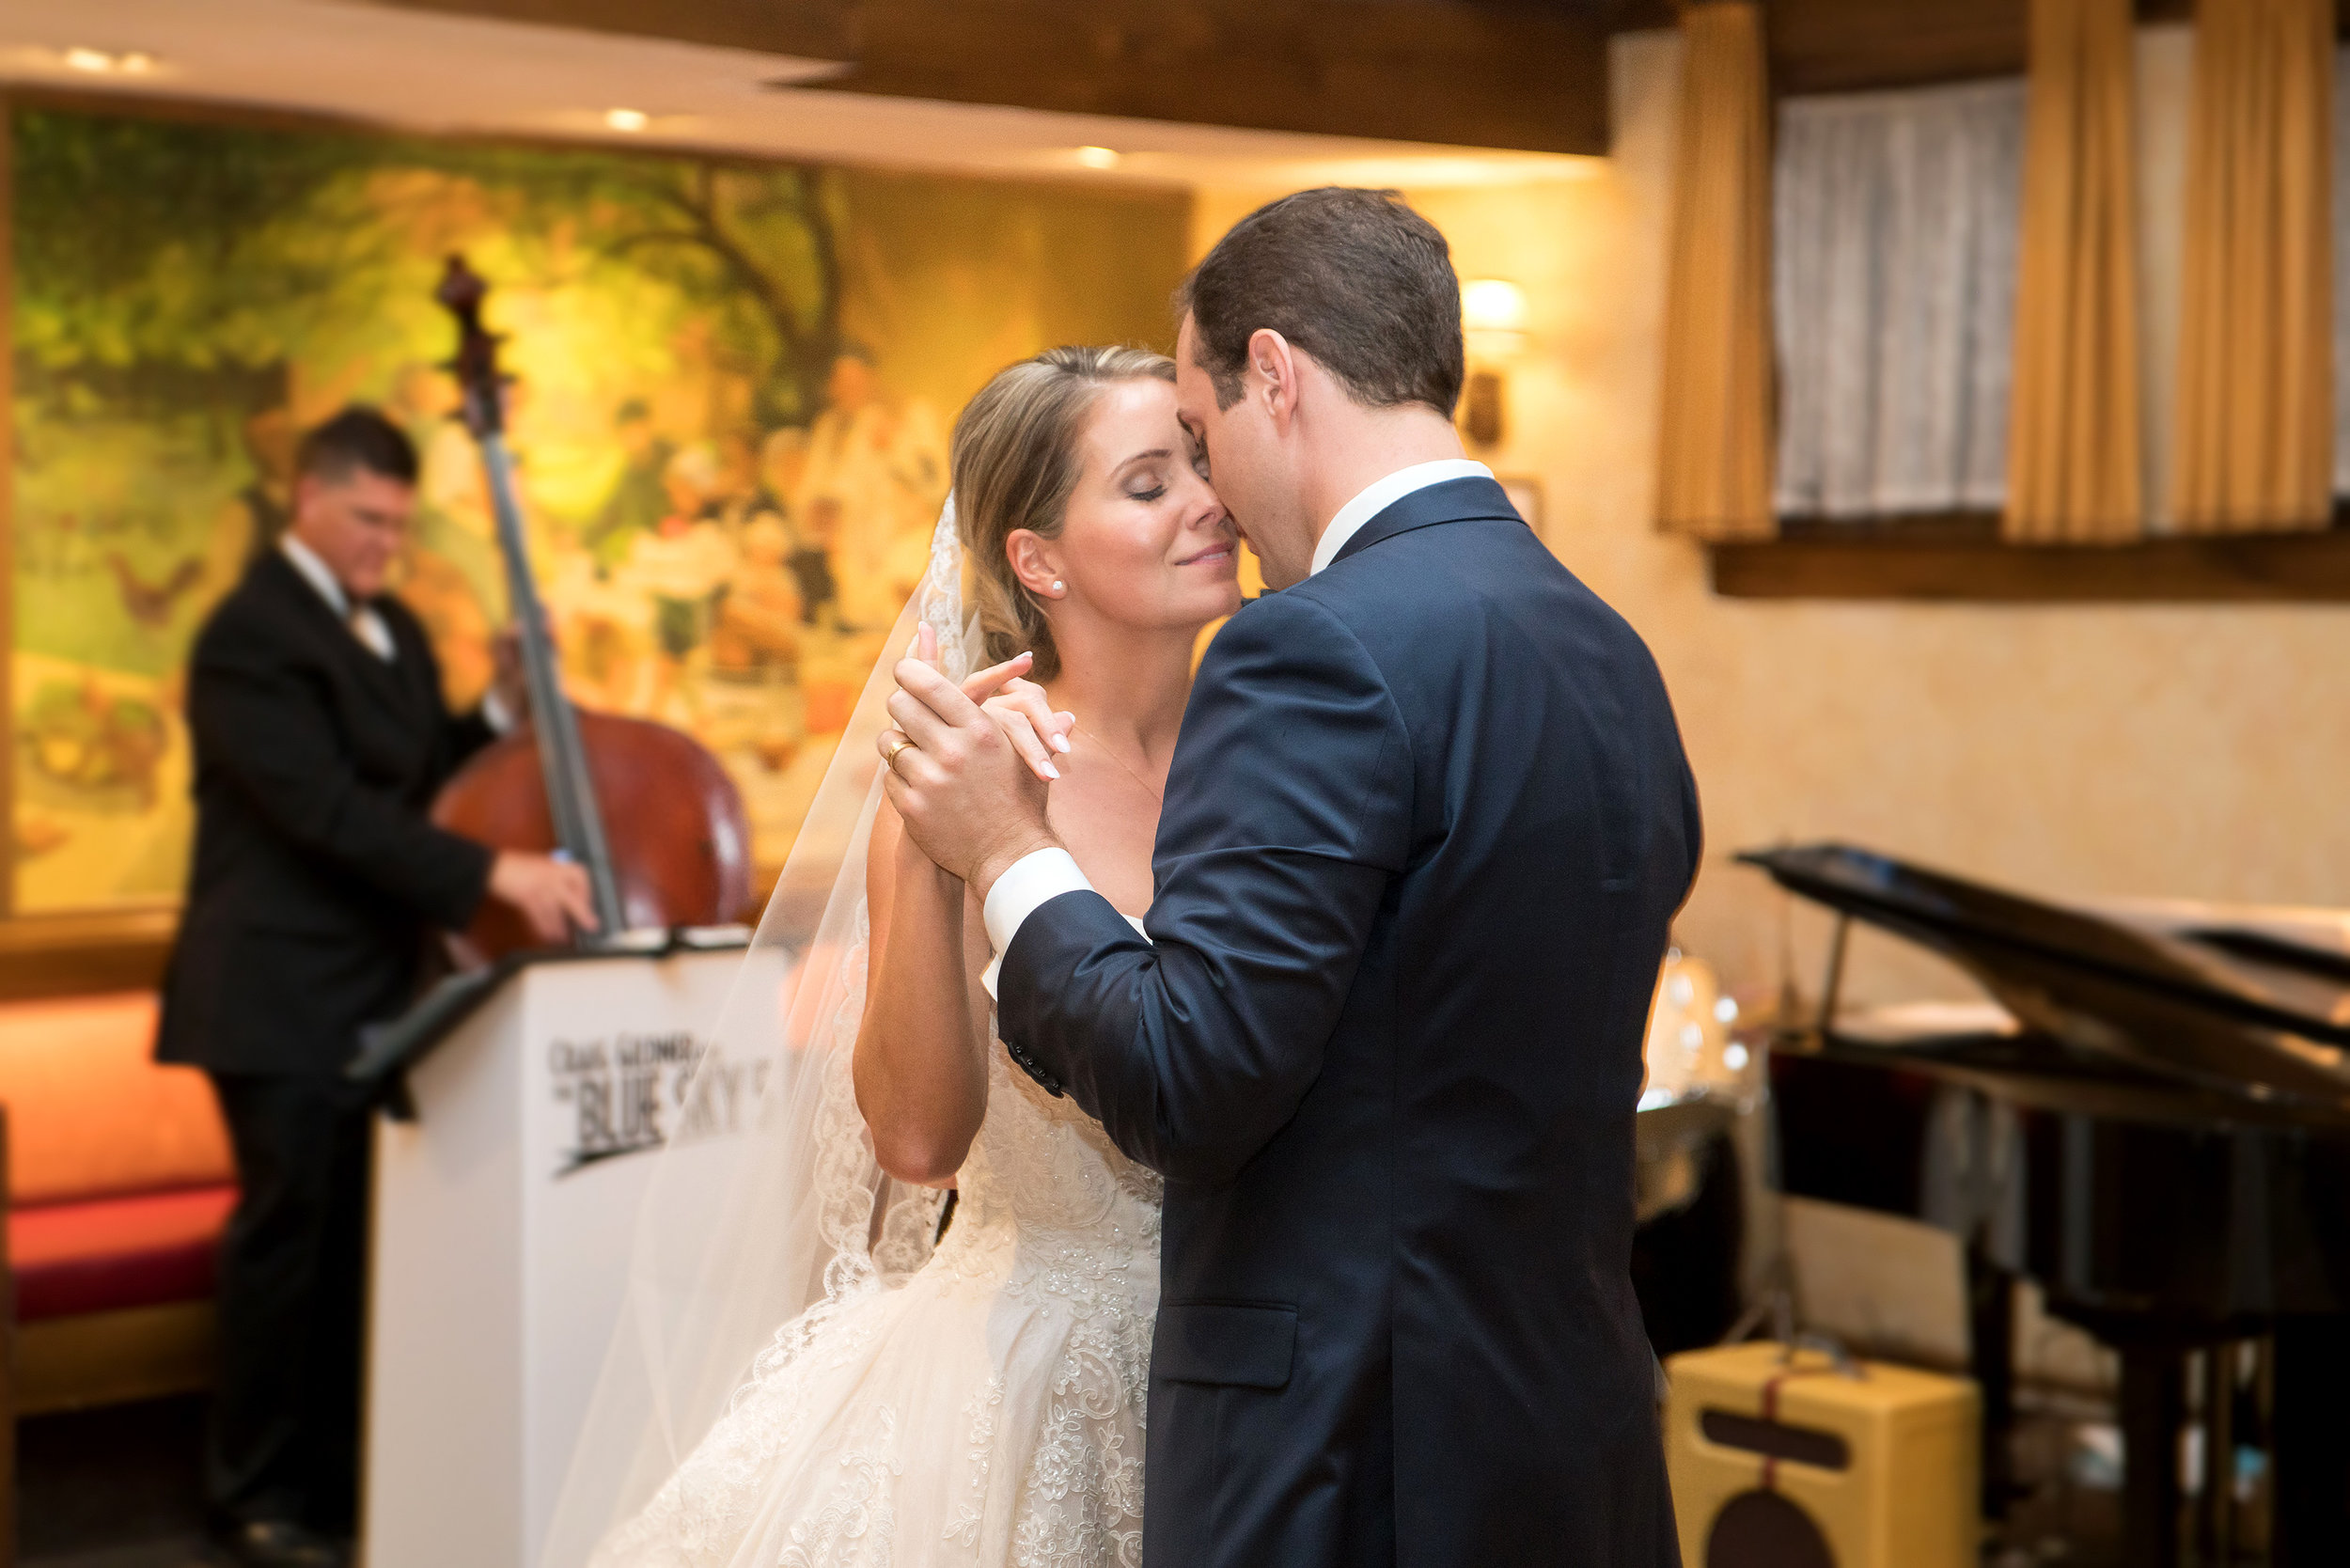 First dance at wedding reception at La Ferme in Bethesda Maryland 